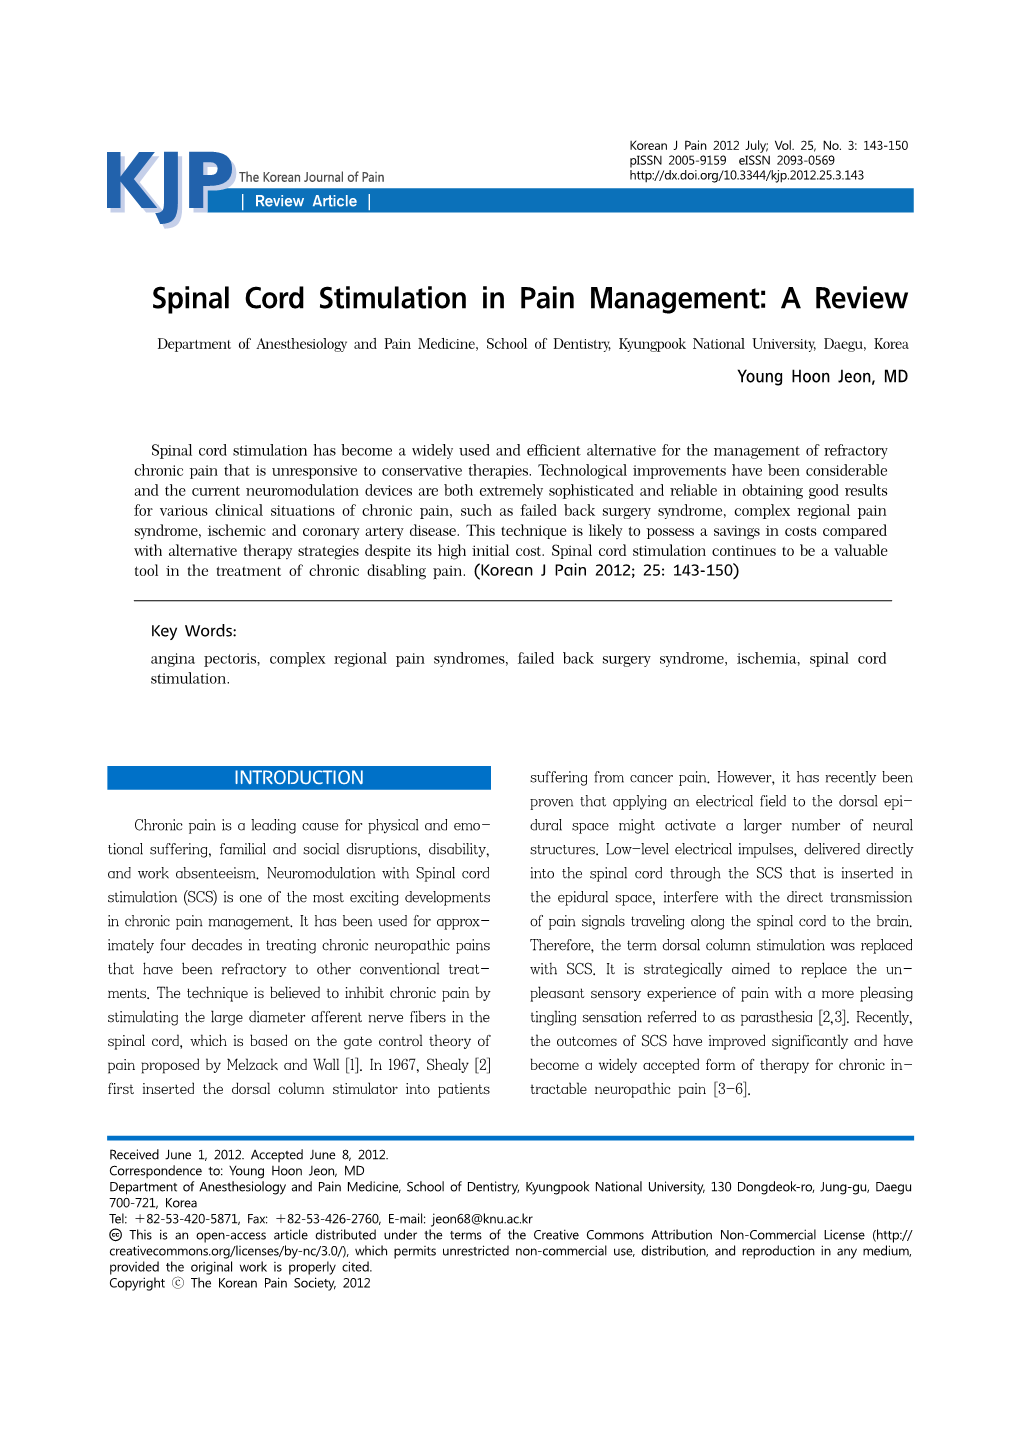 Spinal Cord Stimulation in Pain Management: a Review